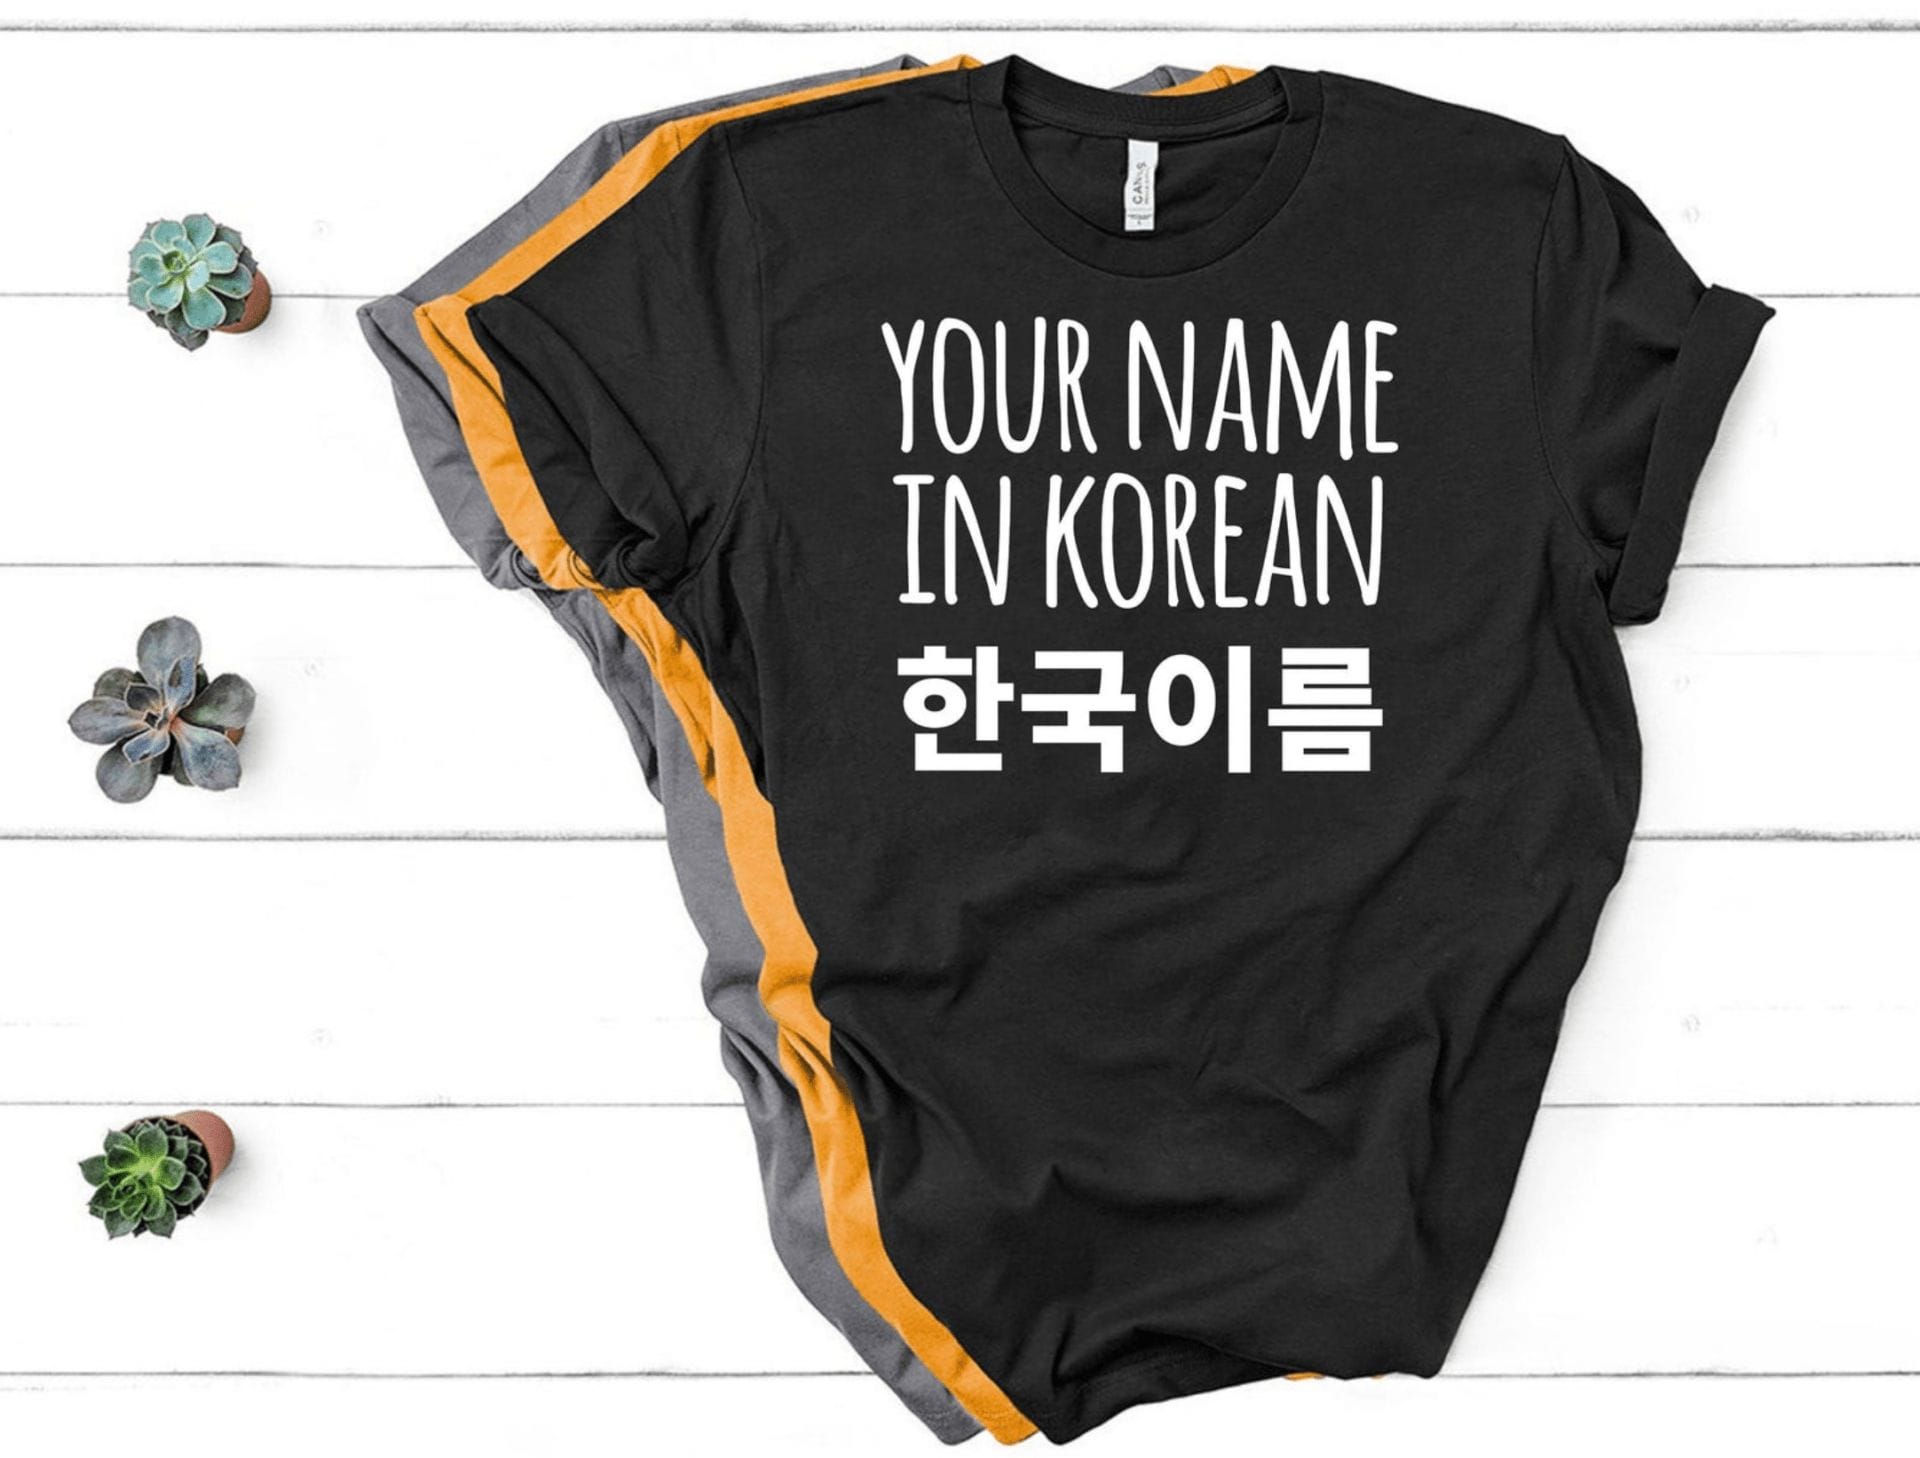 33 Best Korean Gifts - Unique Korean Souvenirs for Friends and Family 19